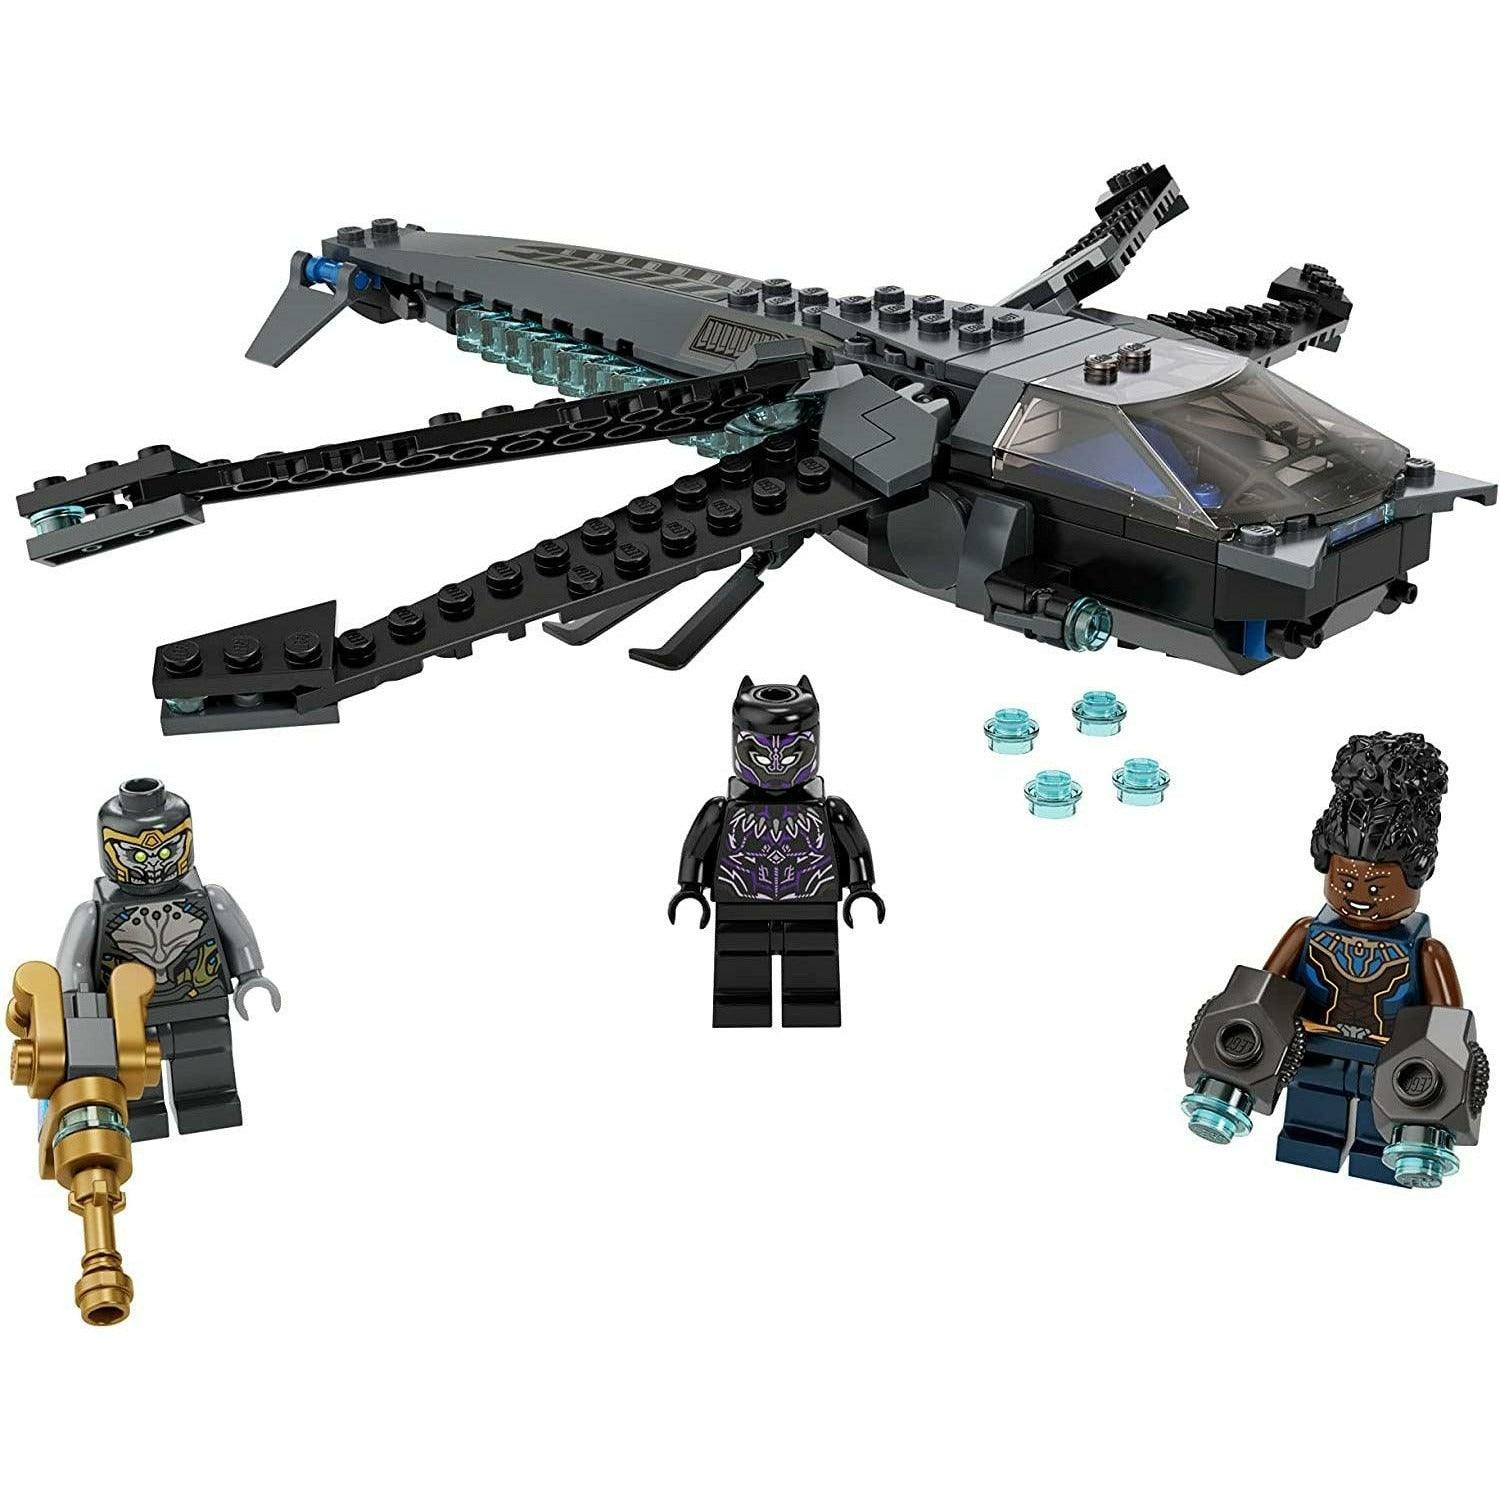 LEGO 76186 Marvel Black Panther Dragon Flyer Create The Final Battle Scene from Avengers Endgame New 2021 (202 Pieces) - BumbleToys - 8+ Years, 8-13 Years, Action Figures, Avengers, Black Panther, Boys, Figures, LEGO, Marvel, OXE, Pre-Order